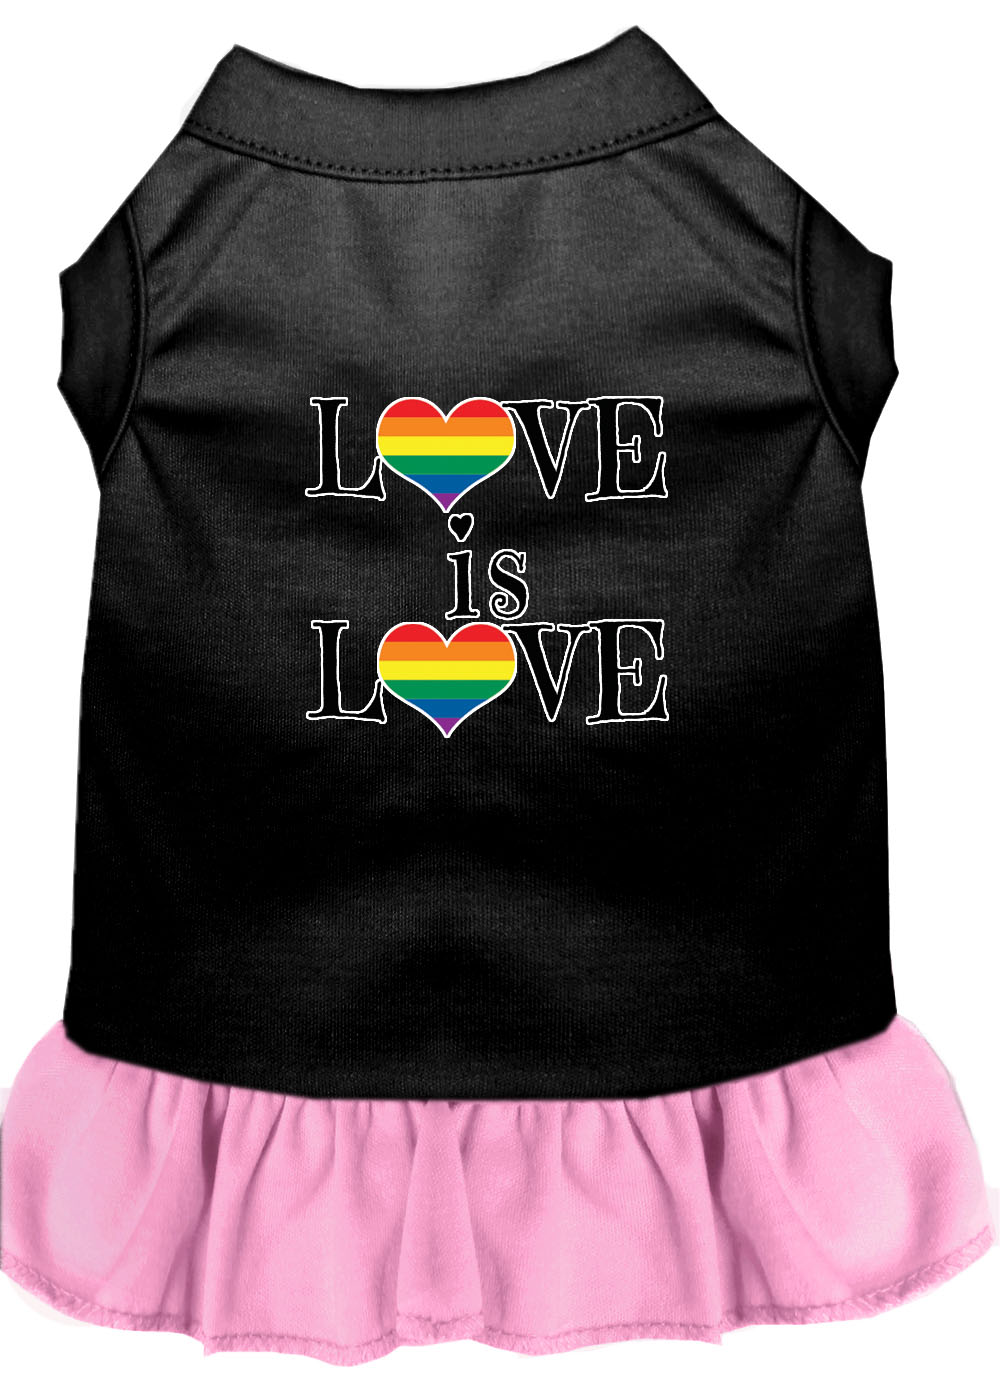 Love is Love Screen Print Dog Dress Black with Light Pink Sm